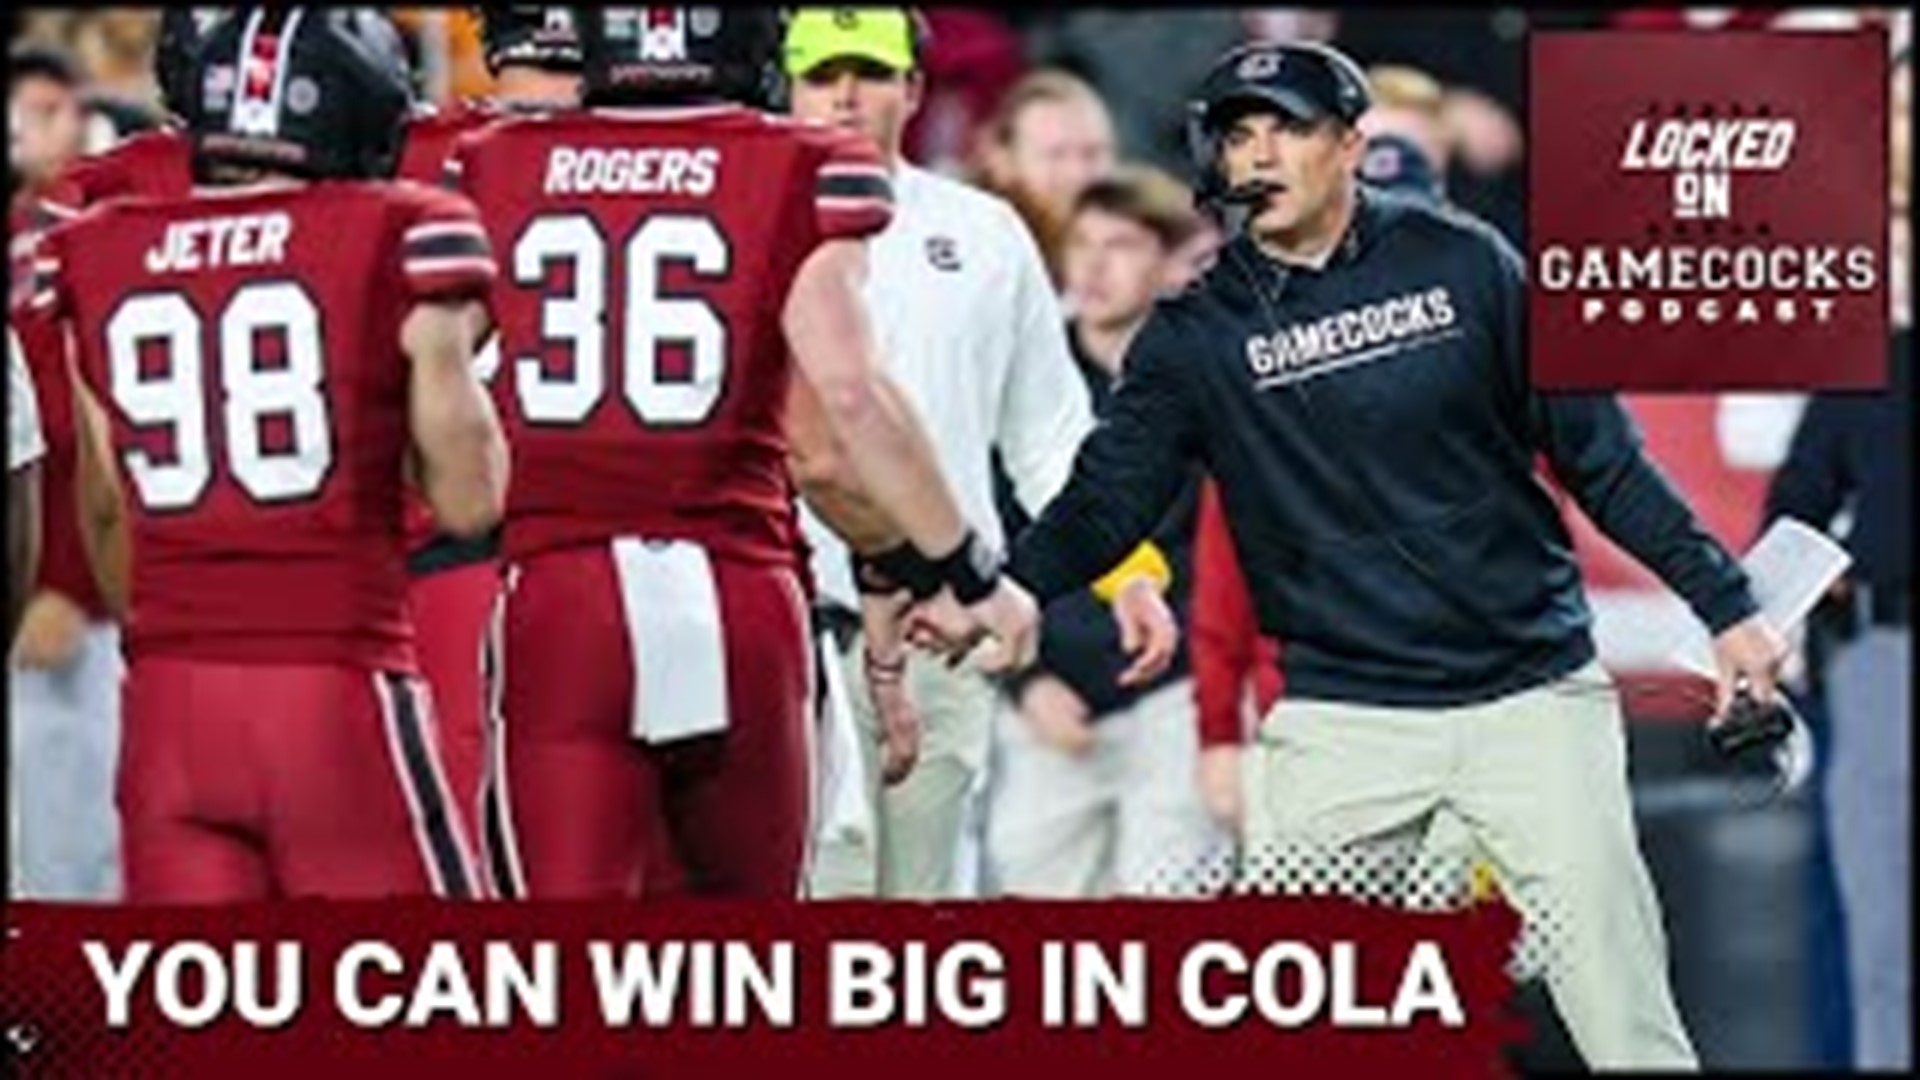 Andrew dives into what the South Carolina Gamecocks' potential program-defining win over the Tennessee Volunteers revalidated about the football program.